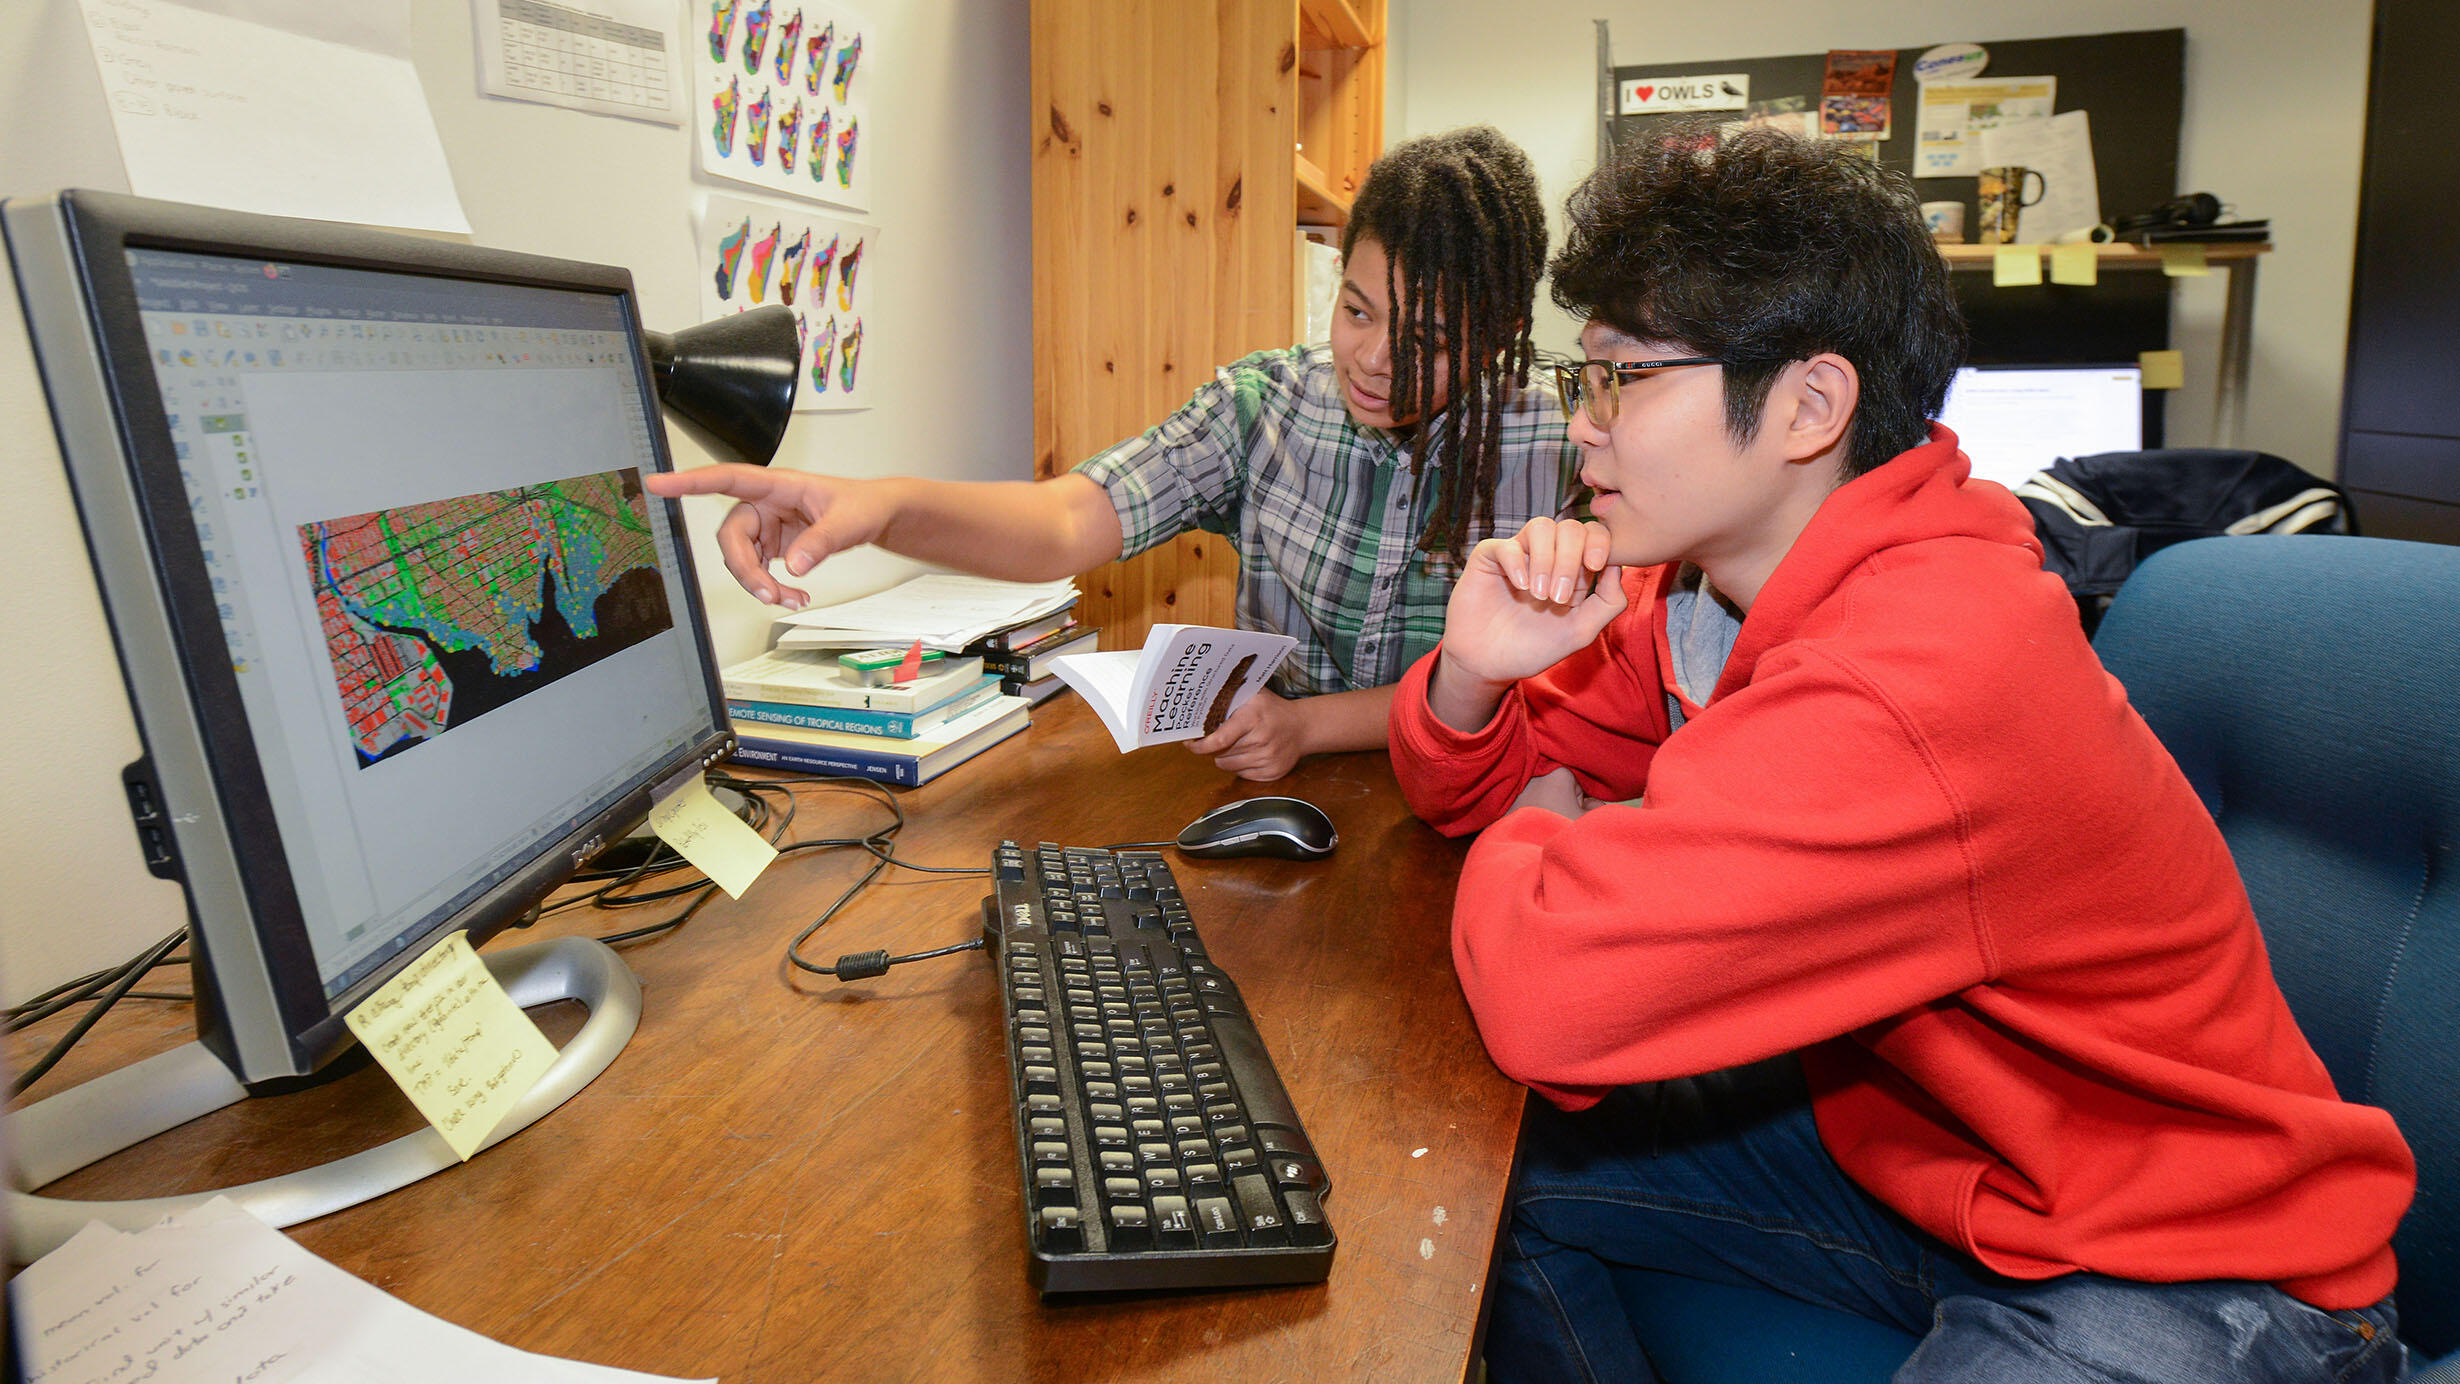 Students Hunter Dillard-Jakubowicz (left) and Henry Lee (right) view a computer screen together.